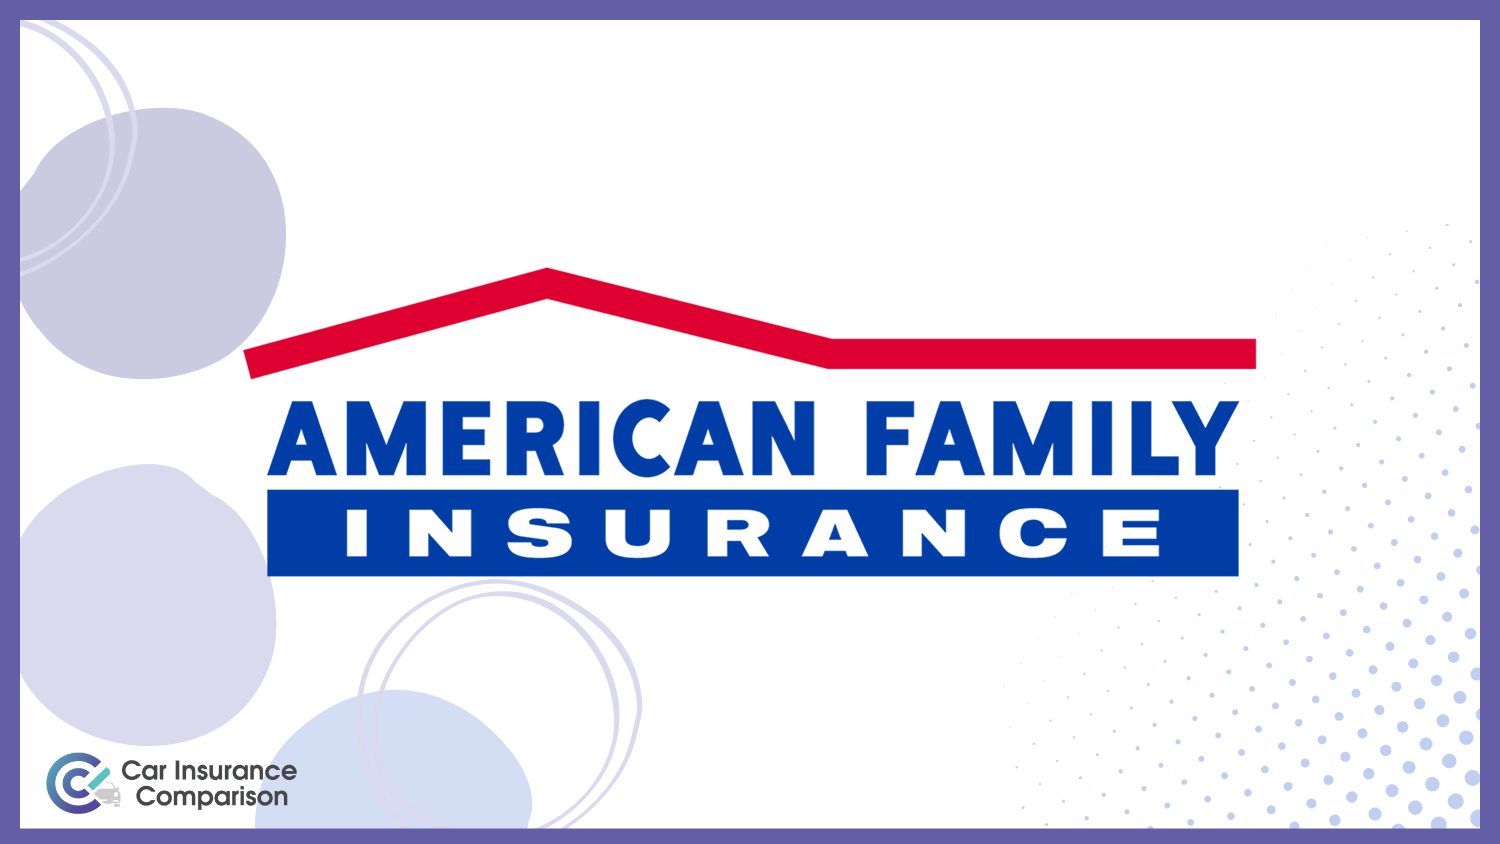 American Family: Best Car Insurance for Inexperienced Drivers